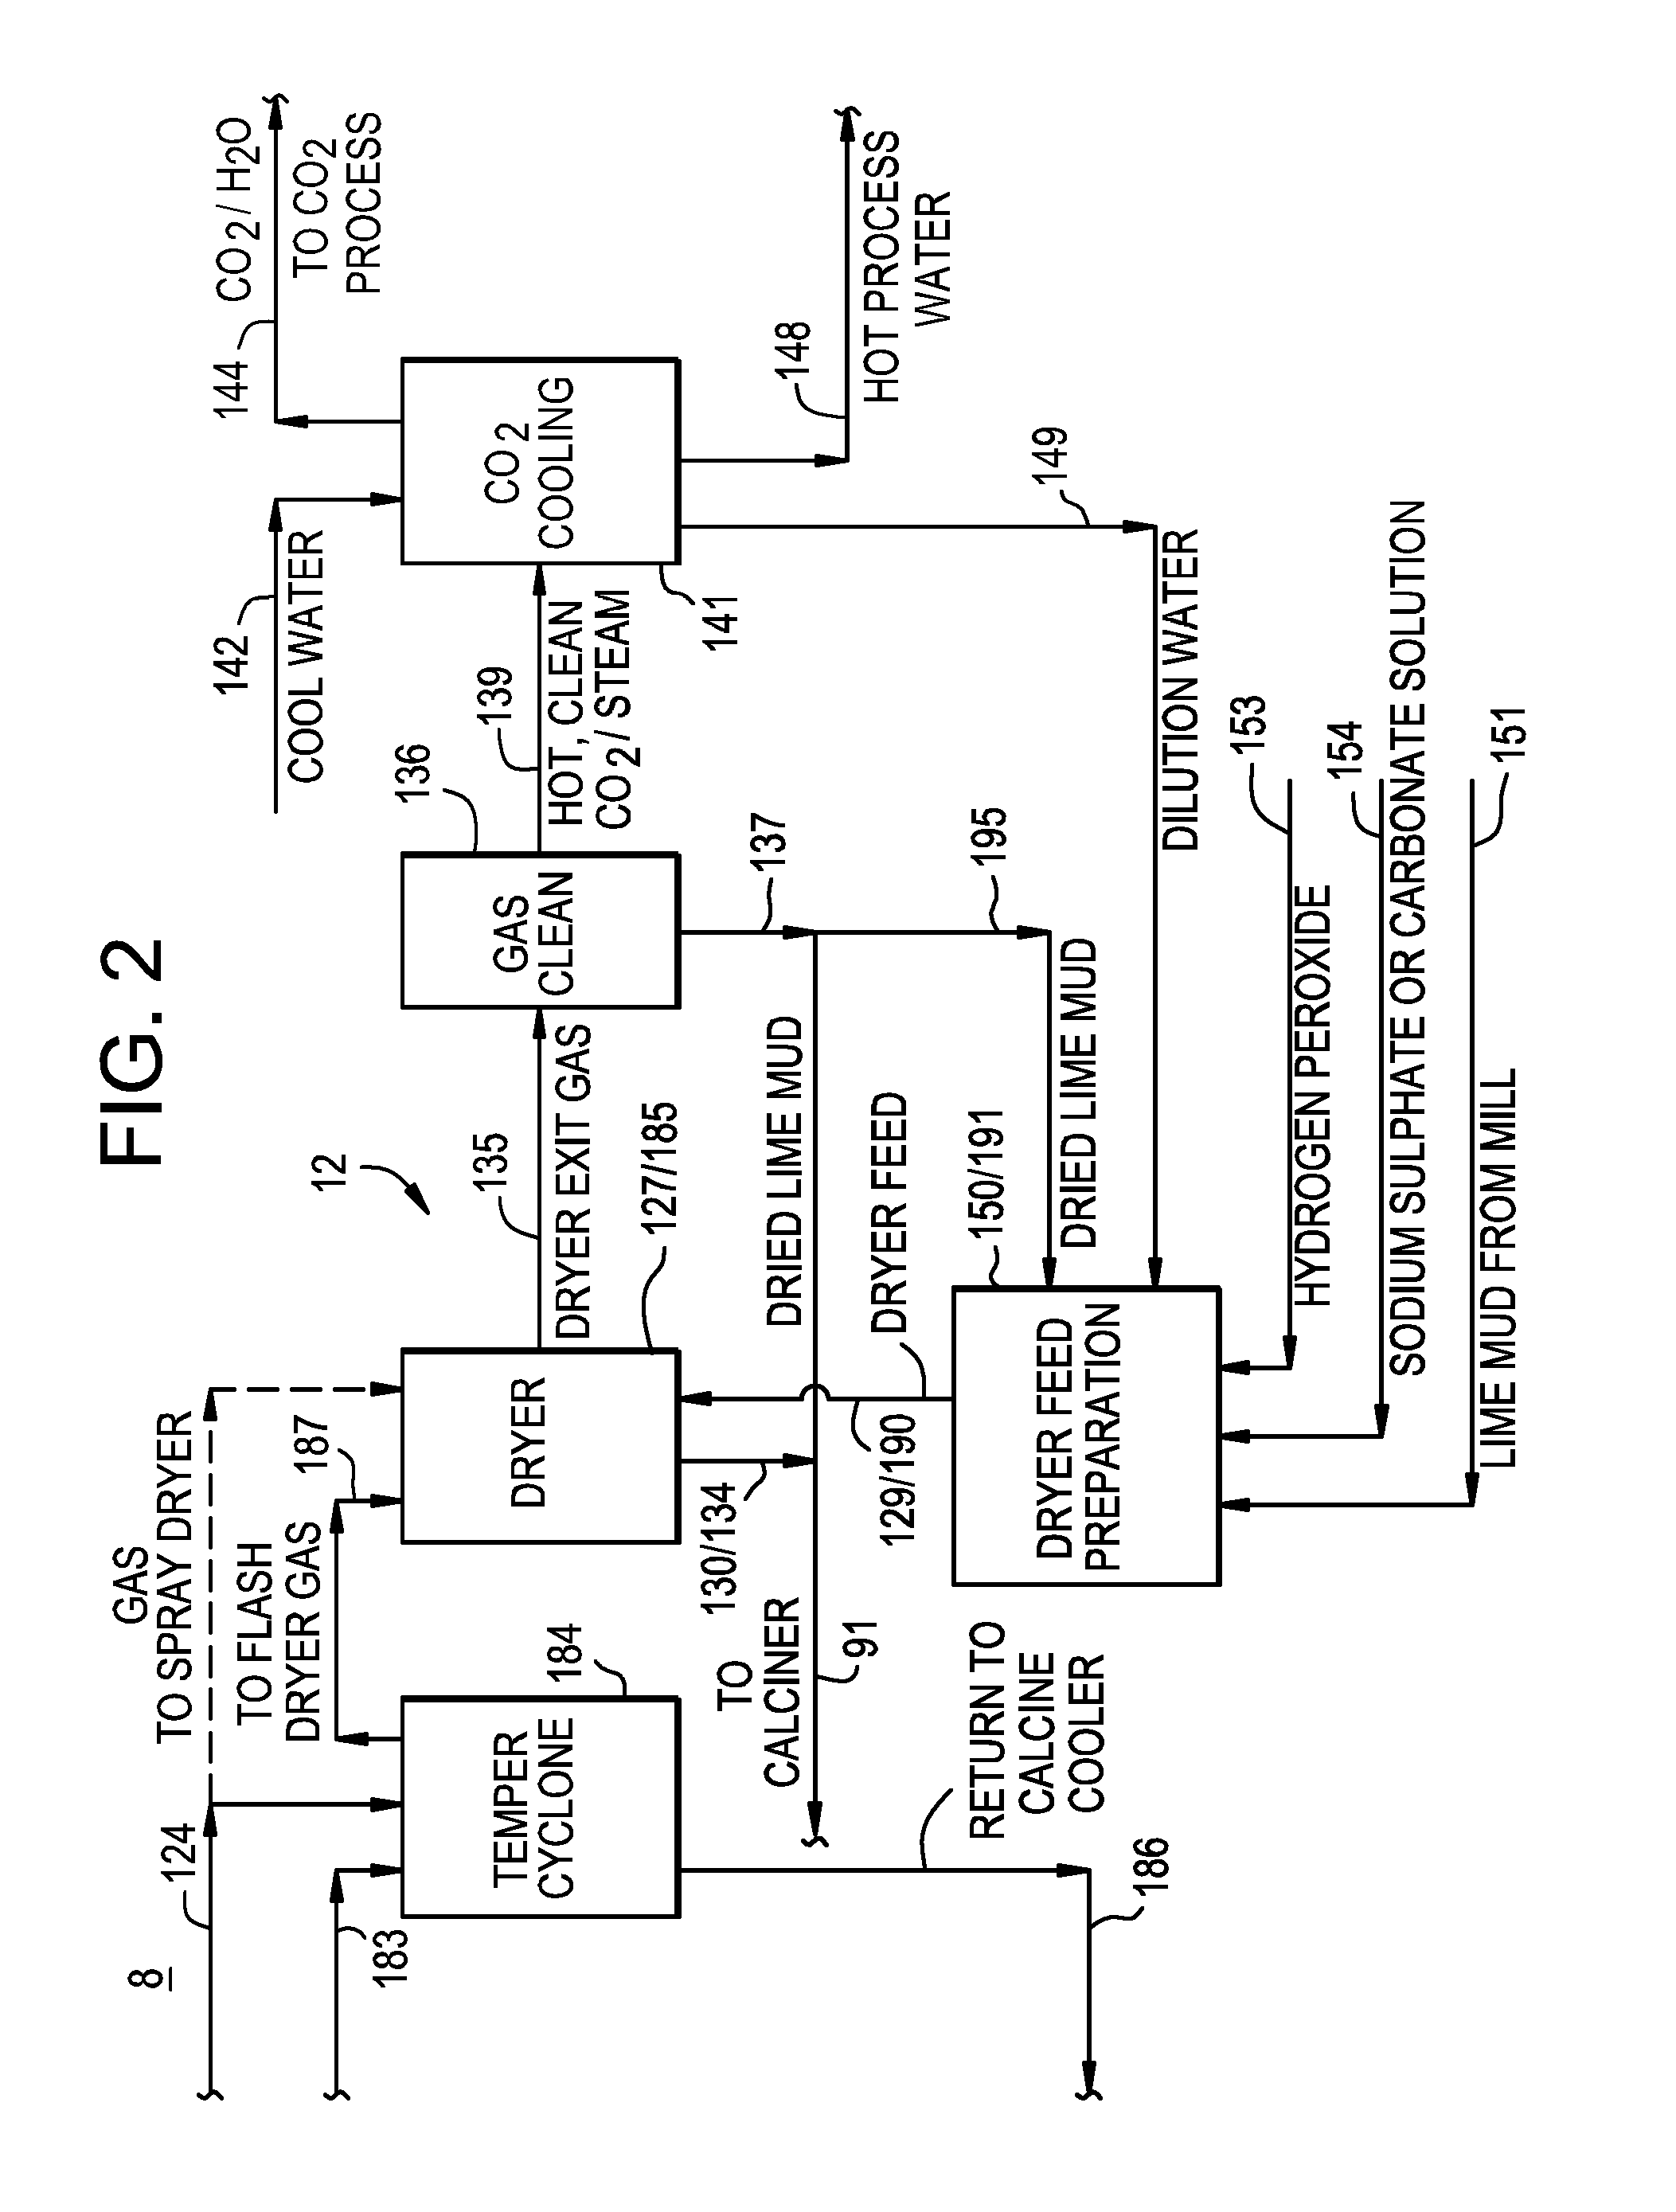 Process and system for producing commercial quality carbon dioxide from recausticizing process calcium carbonates